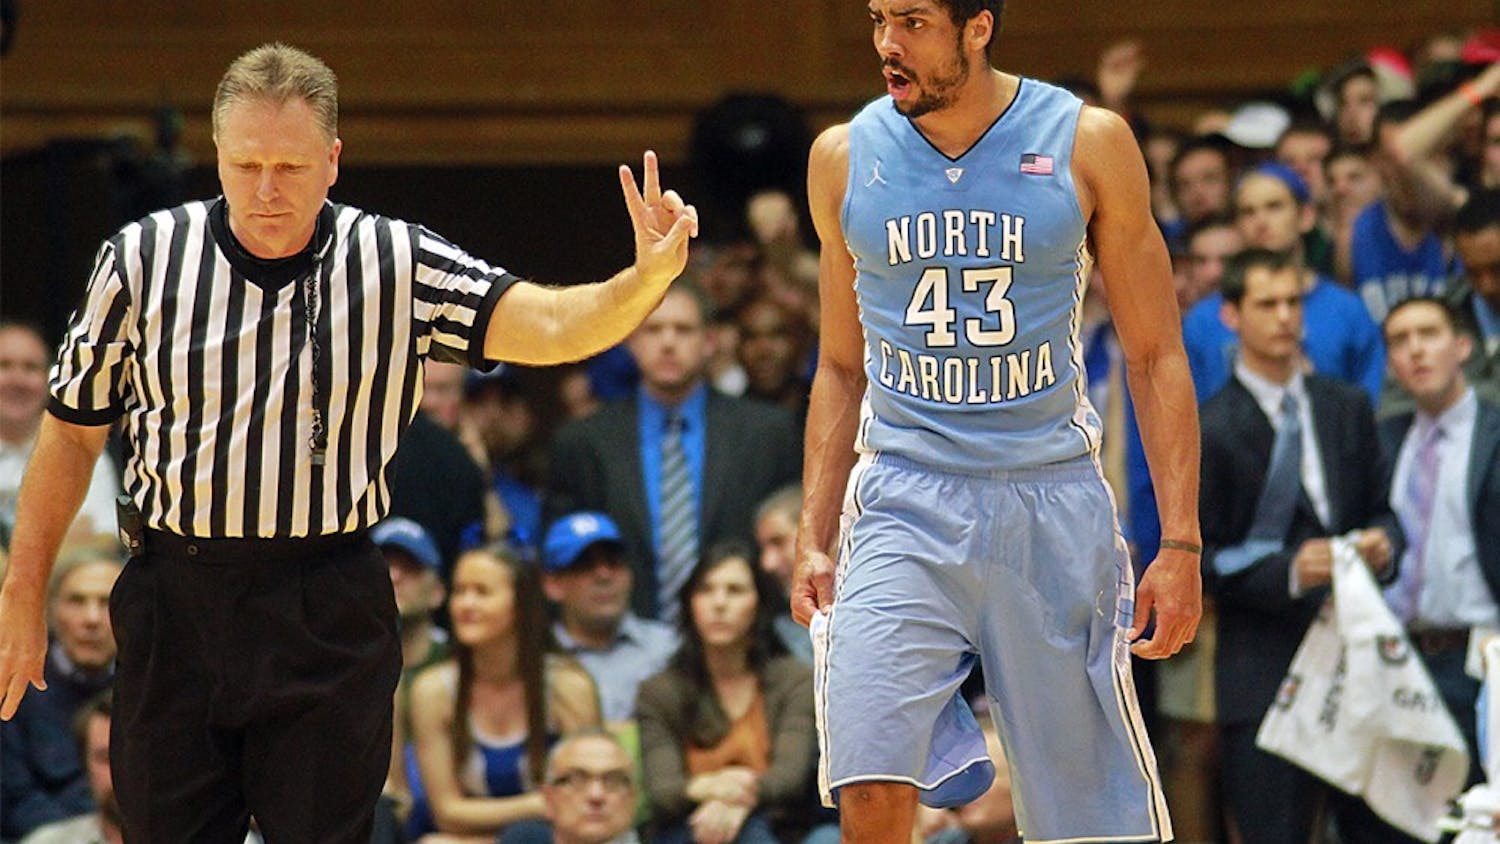 	James Michael McAdoo reacts to picking up a foul. McAdoo had foul trouble early in the game, and ended with four personal fouls.